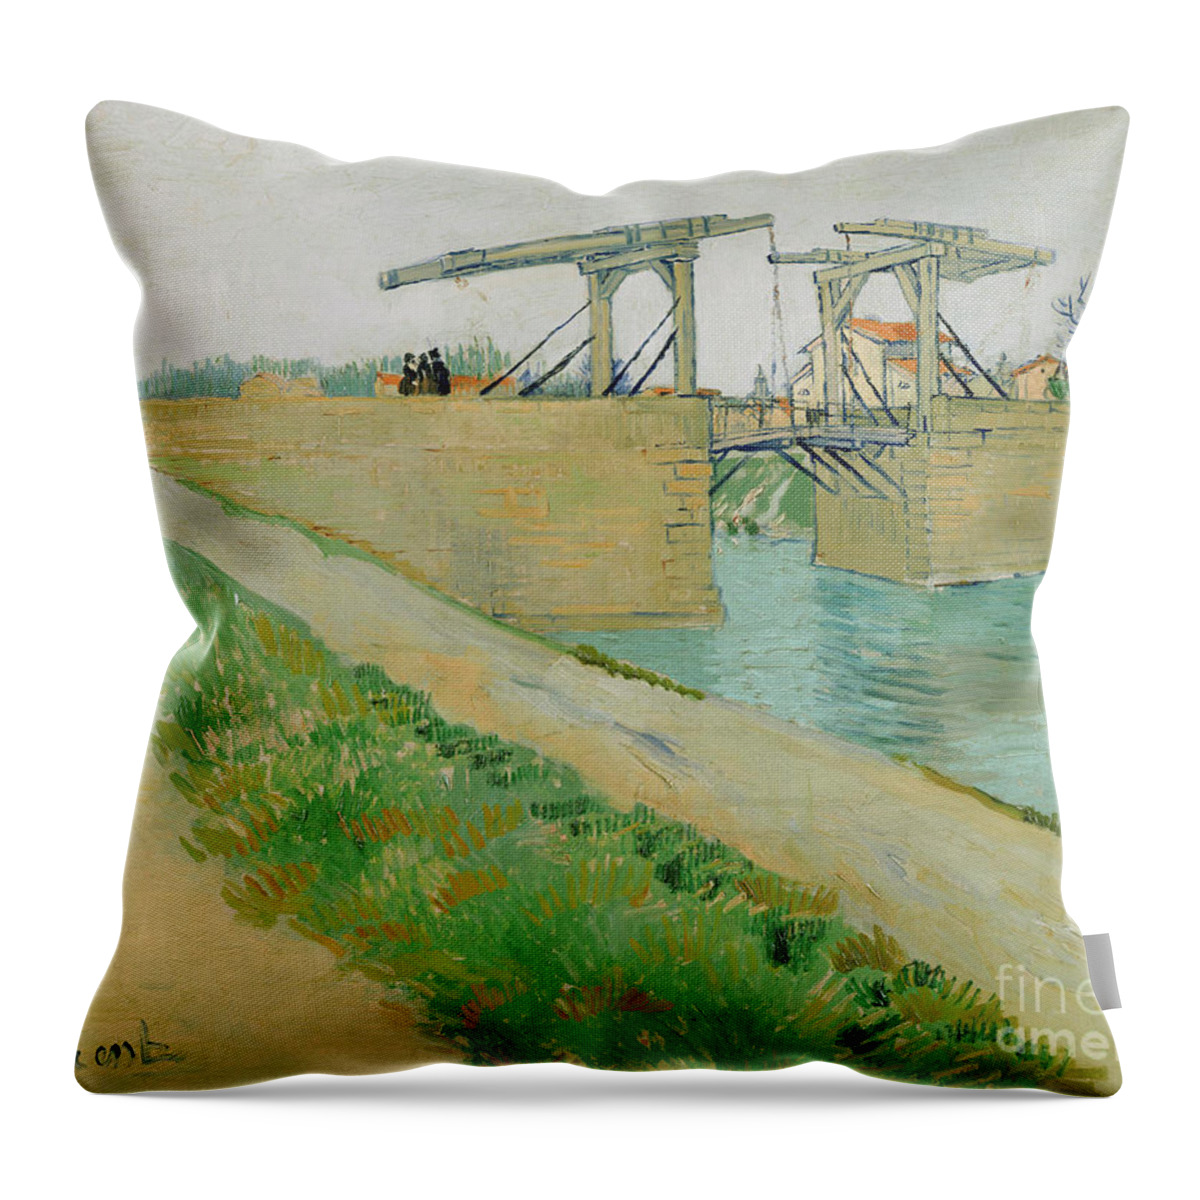 Langlois Throw Pillow featuring the painting The Langlois Bridge, March 1888 by Van Gogh by Vincent van Gogh